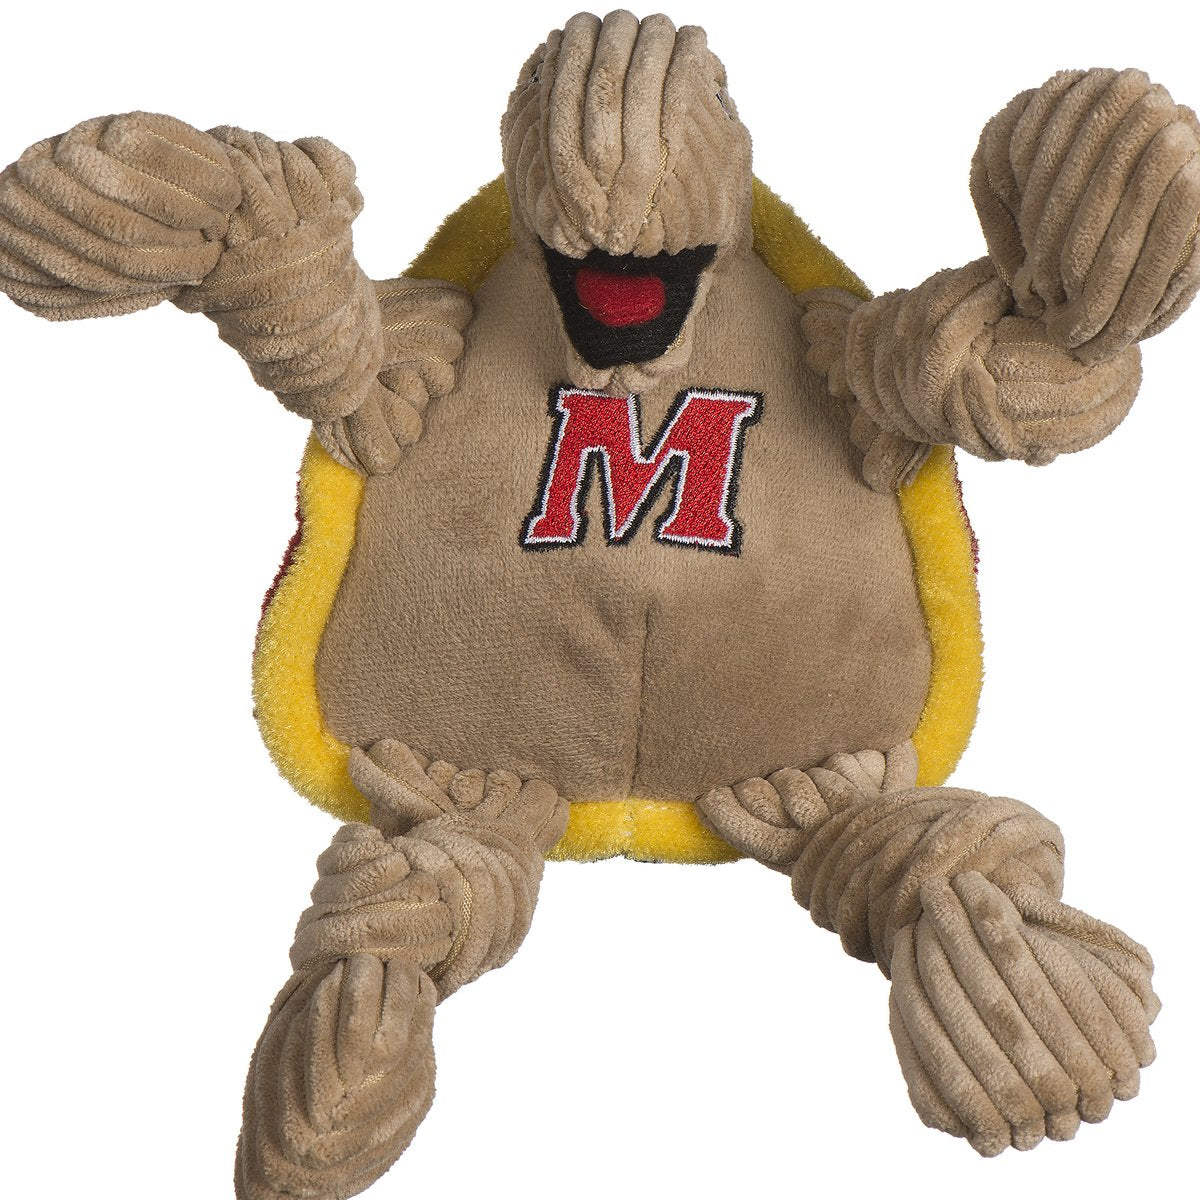 HuggleHounds Knottie Officially Licensed College Mascot Durable Squeaky Plush Dog Toy, Maryland Terrapins